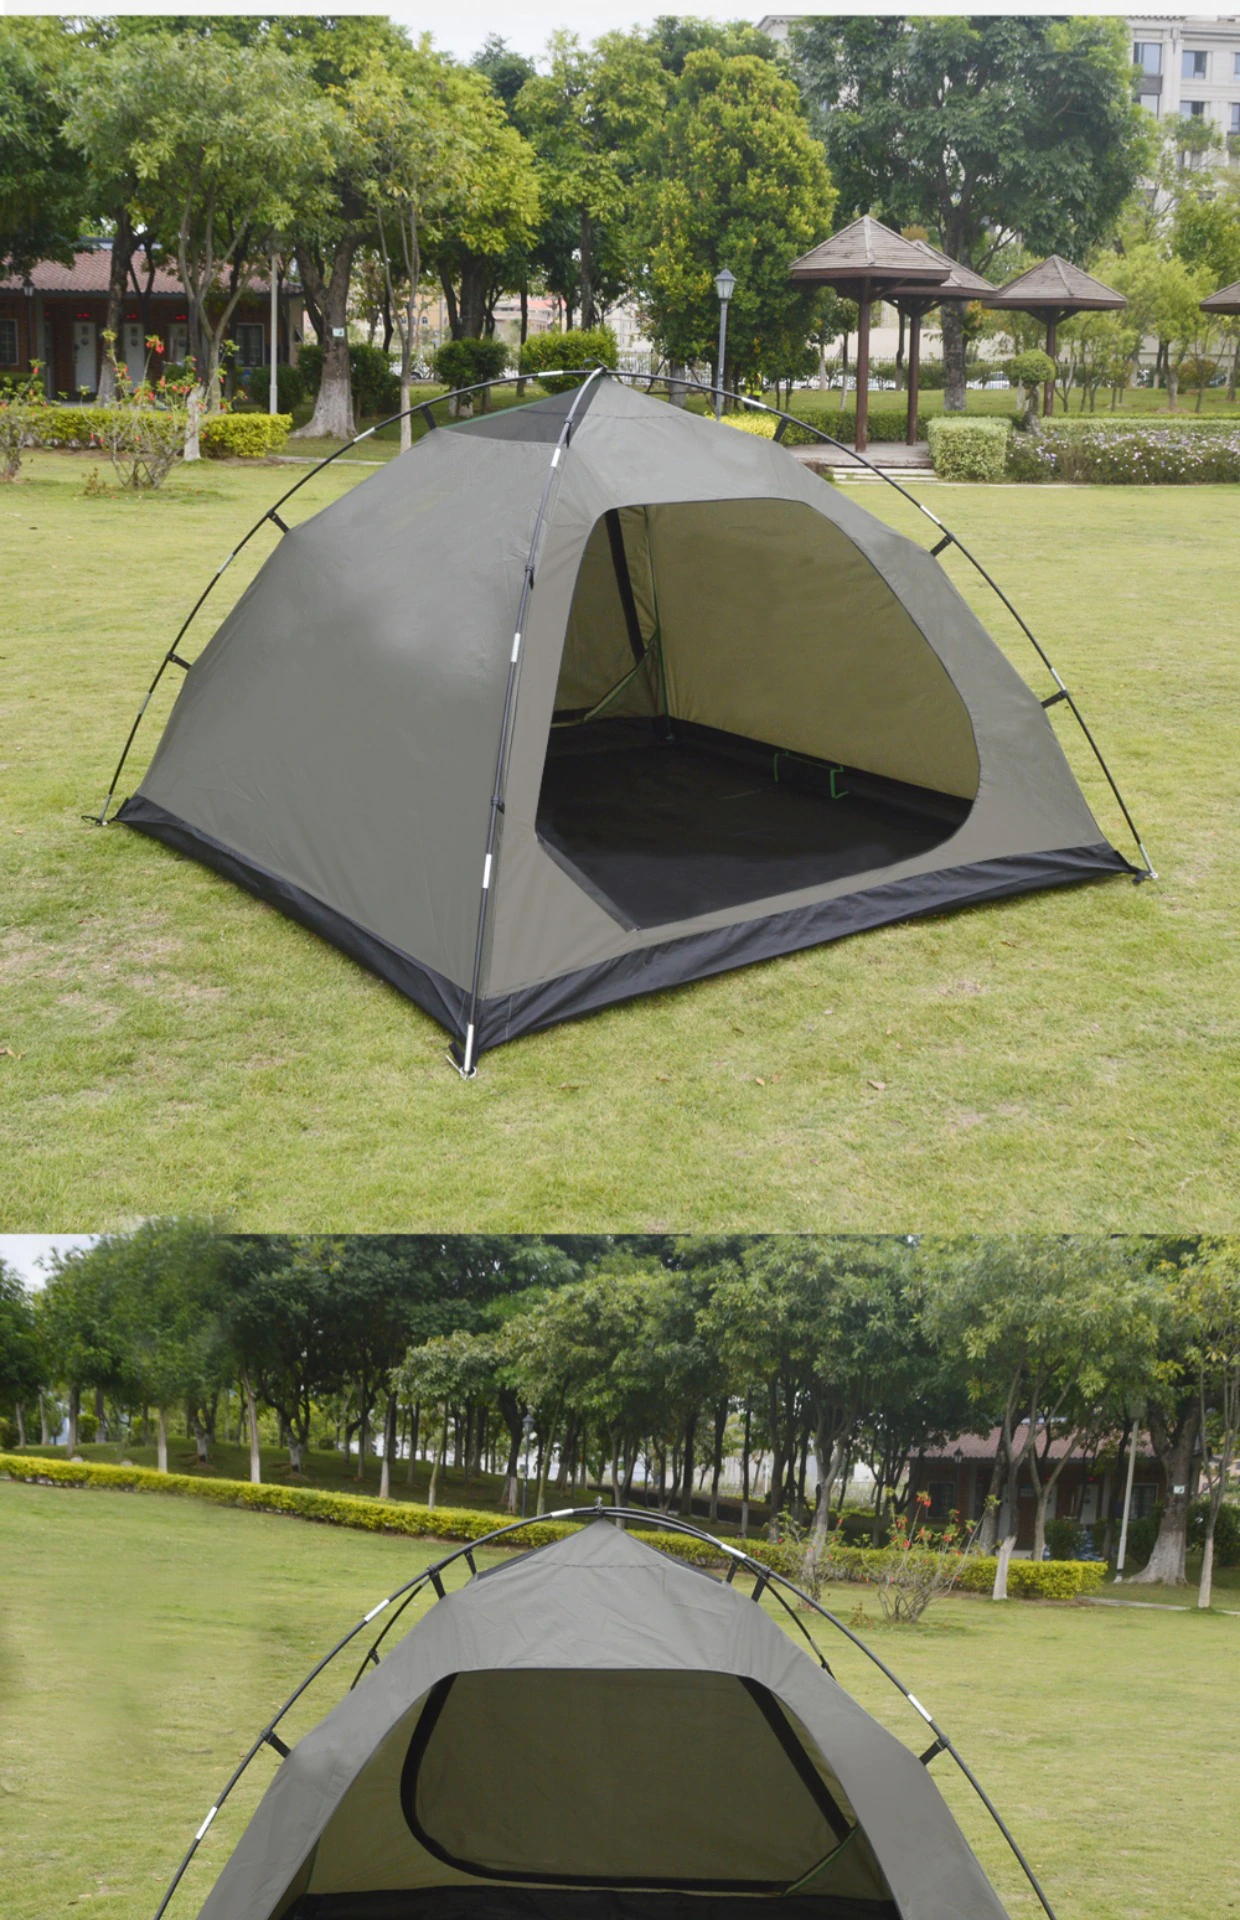 Cheap Goat Tents 3 4 Person Outdoor Camping Tent Park Picnic 1 Bedroom 1 Living Room Tent Shelter Rainproof Hiking Family Travel BBQ Tent   